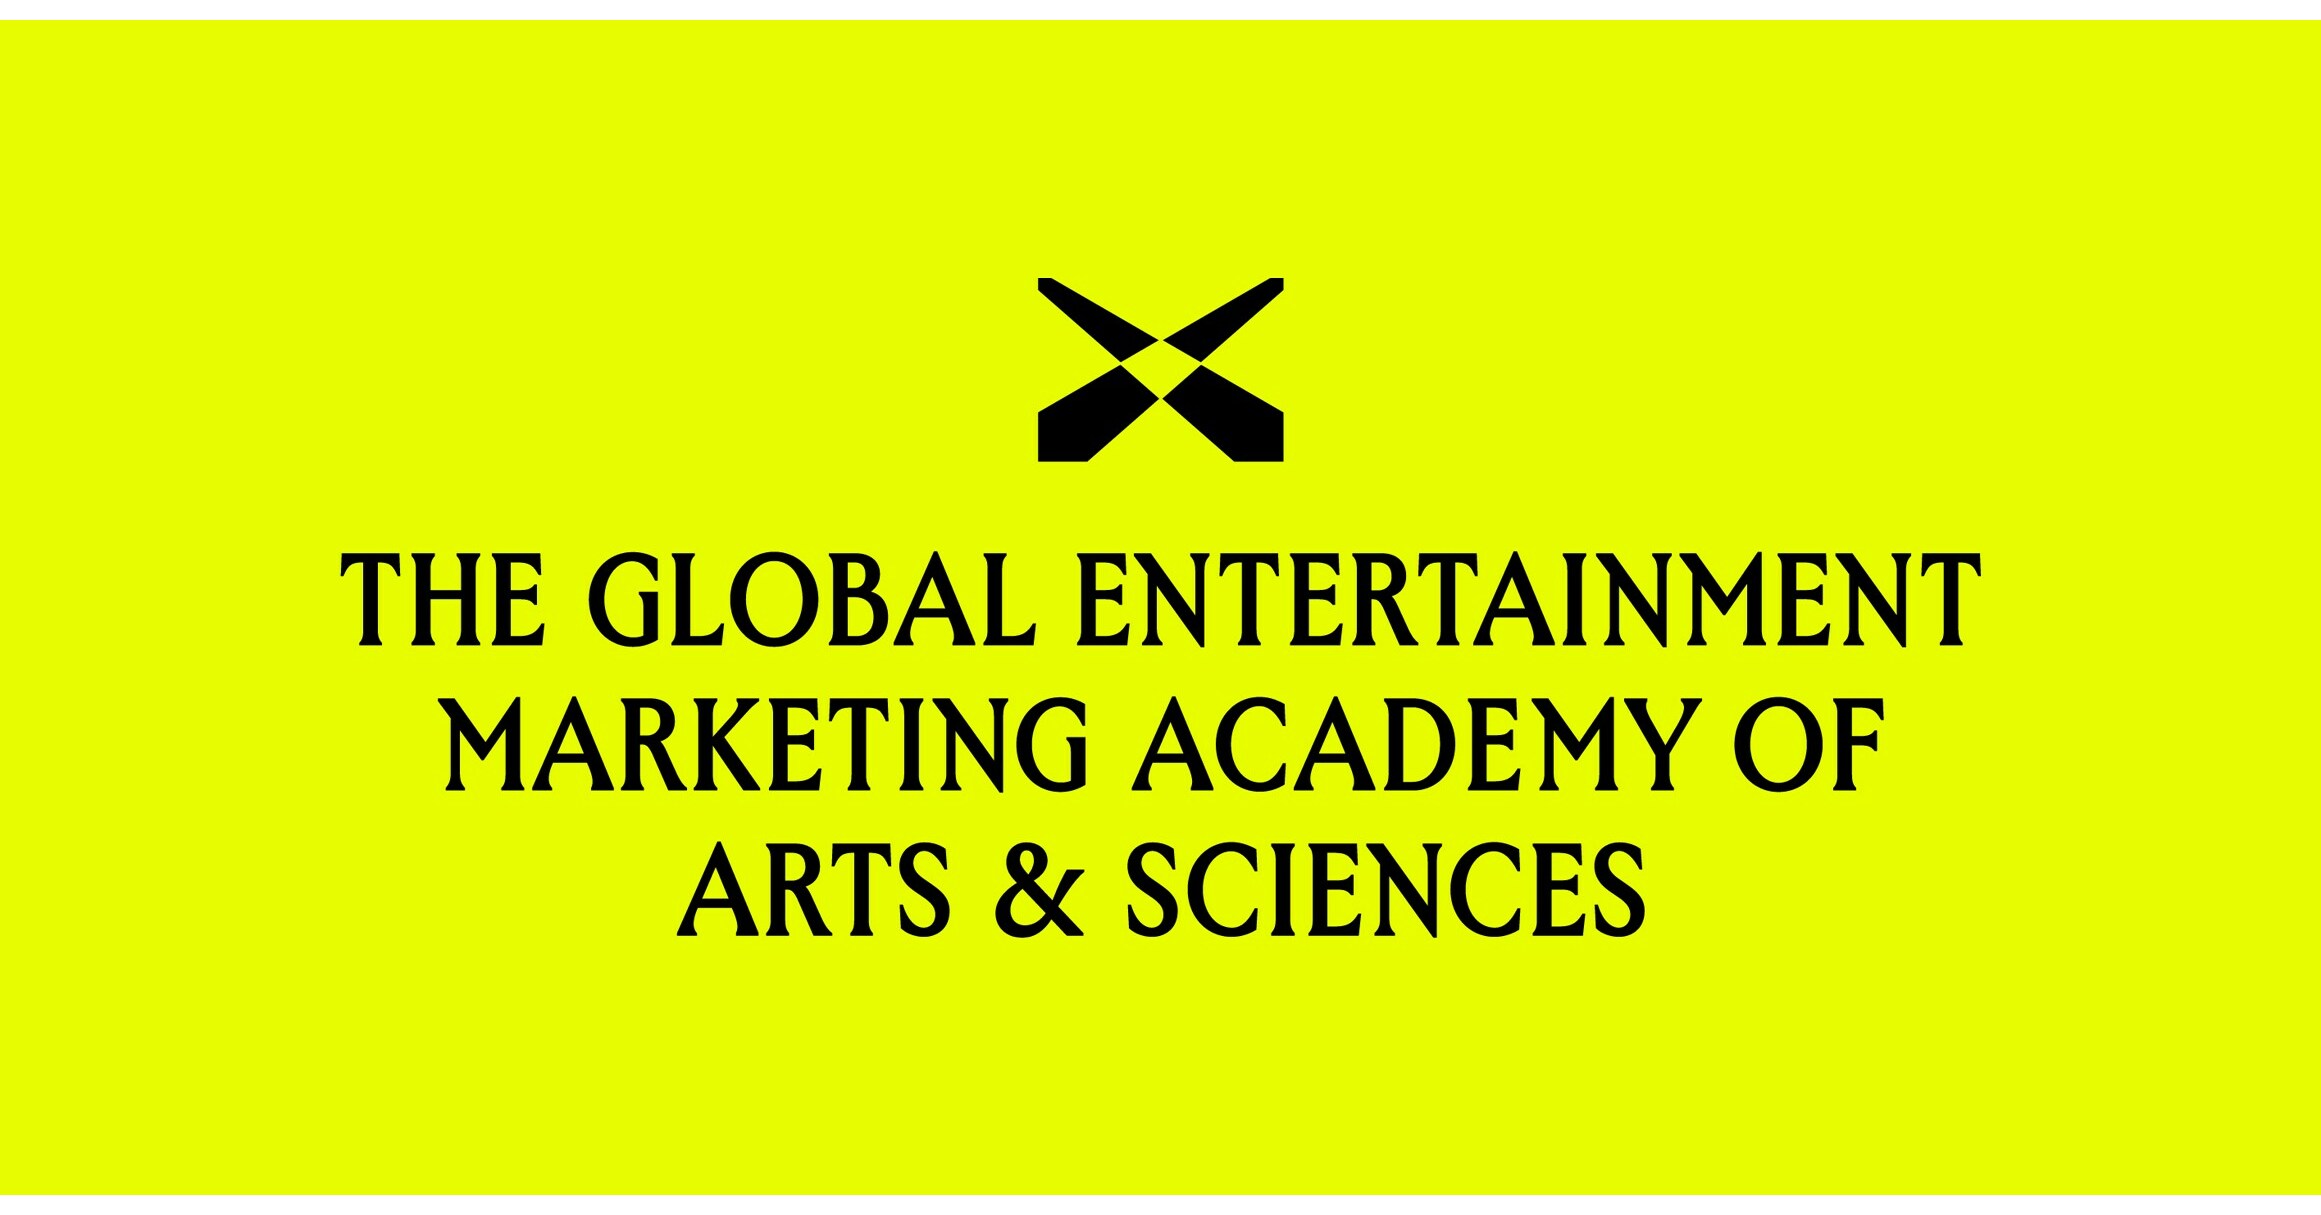 Promax unveils transformation into The Global Entertainment Marketing  Academy of Arts & Sciences with major changes to membership model, brand  identity, and award categories